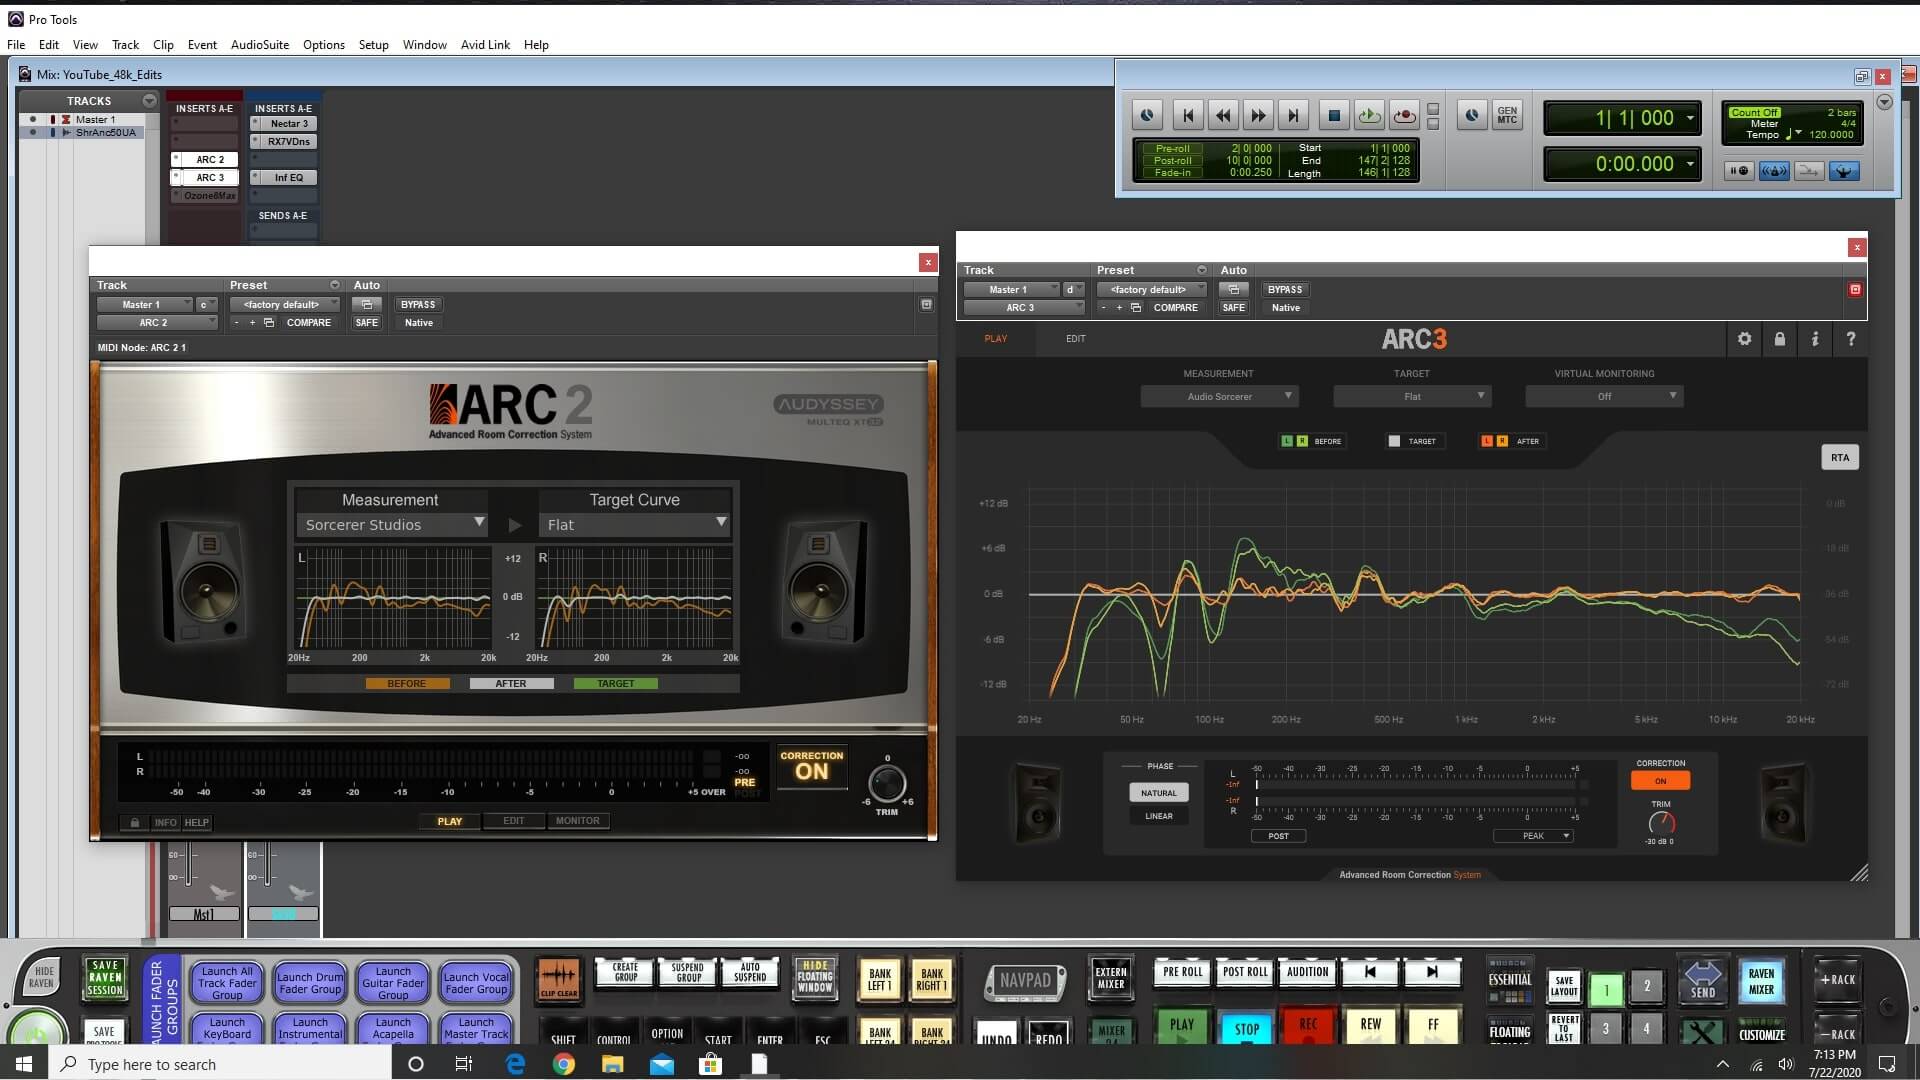 Comparison pictures of the IK Multimedia ARC System 2 and the IK Multimedia ARC System 3 in a Pro Tools session.